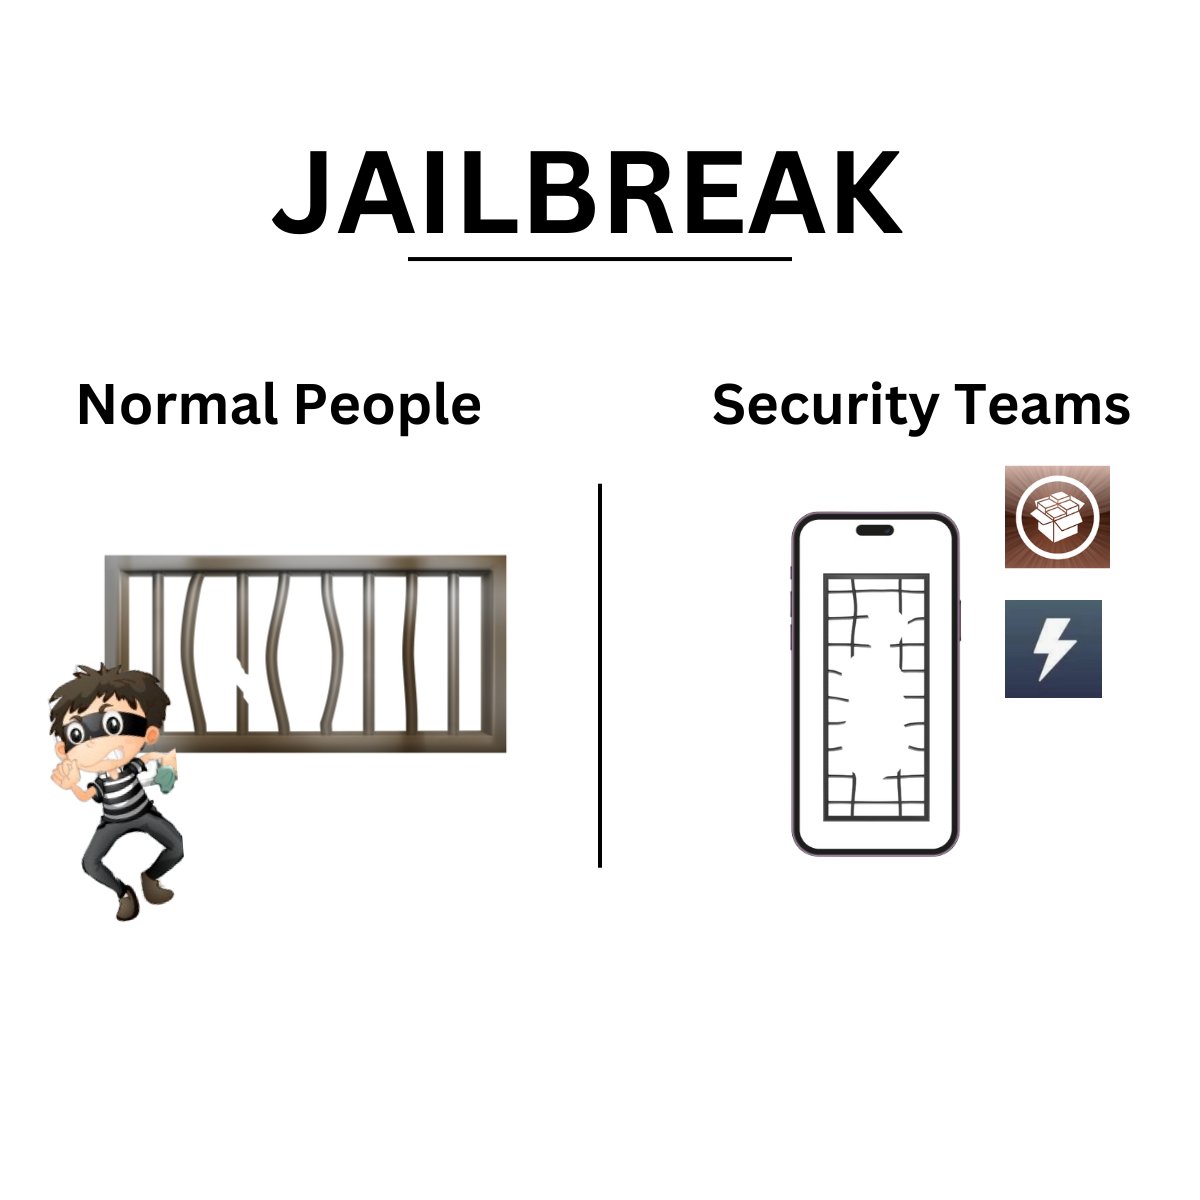 Same same but different. Security teams have a completely different visualisation for common terms like jailbreak, rooting, overlay, repackaging, etc.
#jailbreak #jailbrokendevices #iphone #securityteams #cybersecurity #cyberdefence #apprepackaging #appoveralay #overlayattacks